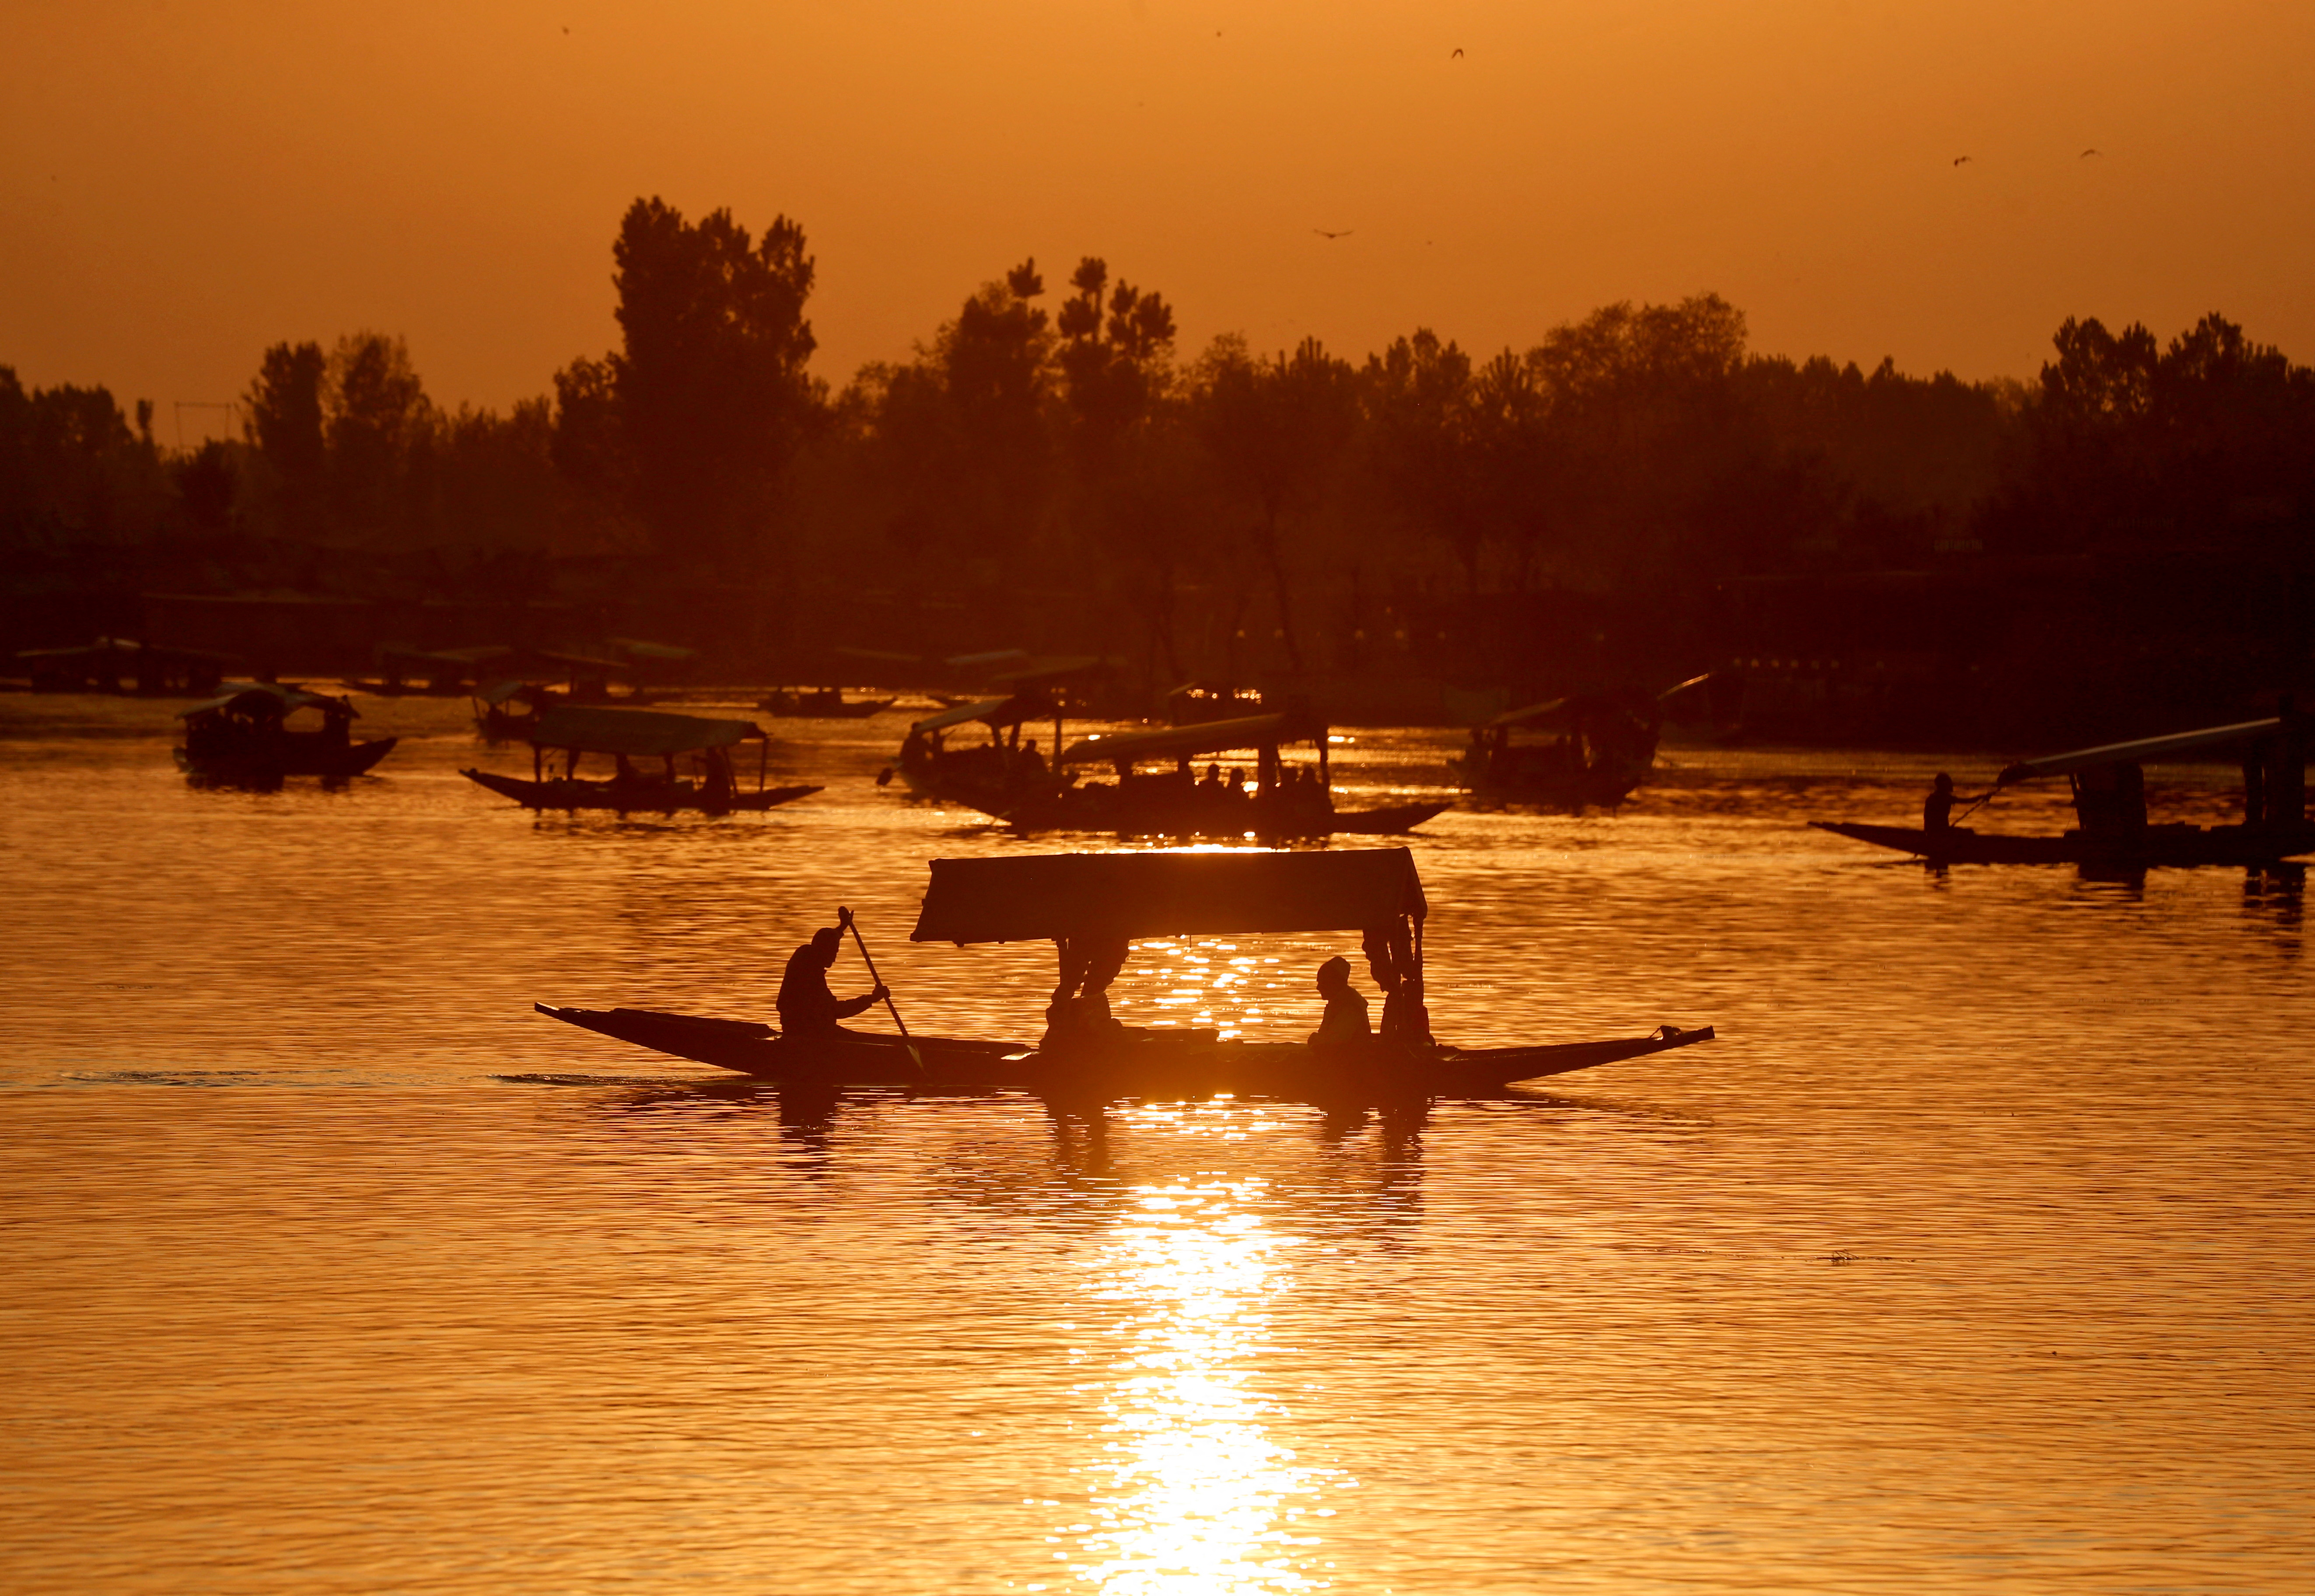 Tourists ride "Shikaras" or boats in the waters of Dal Lake during sunset in Srinagar